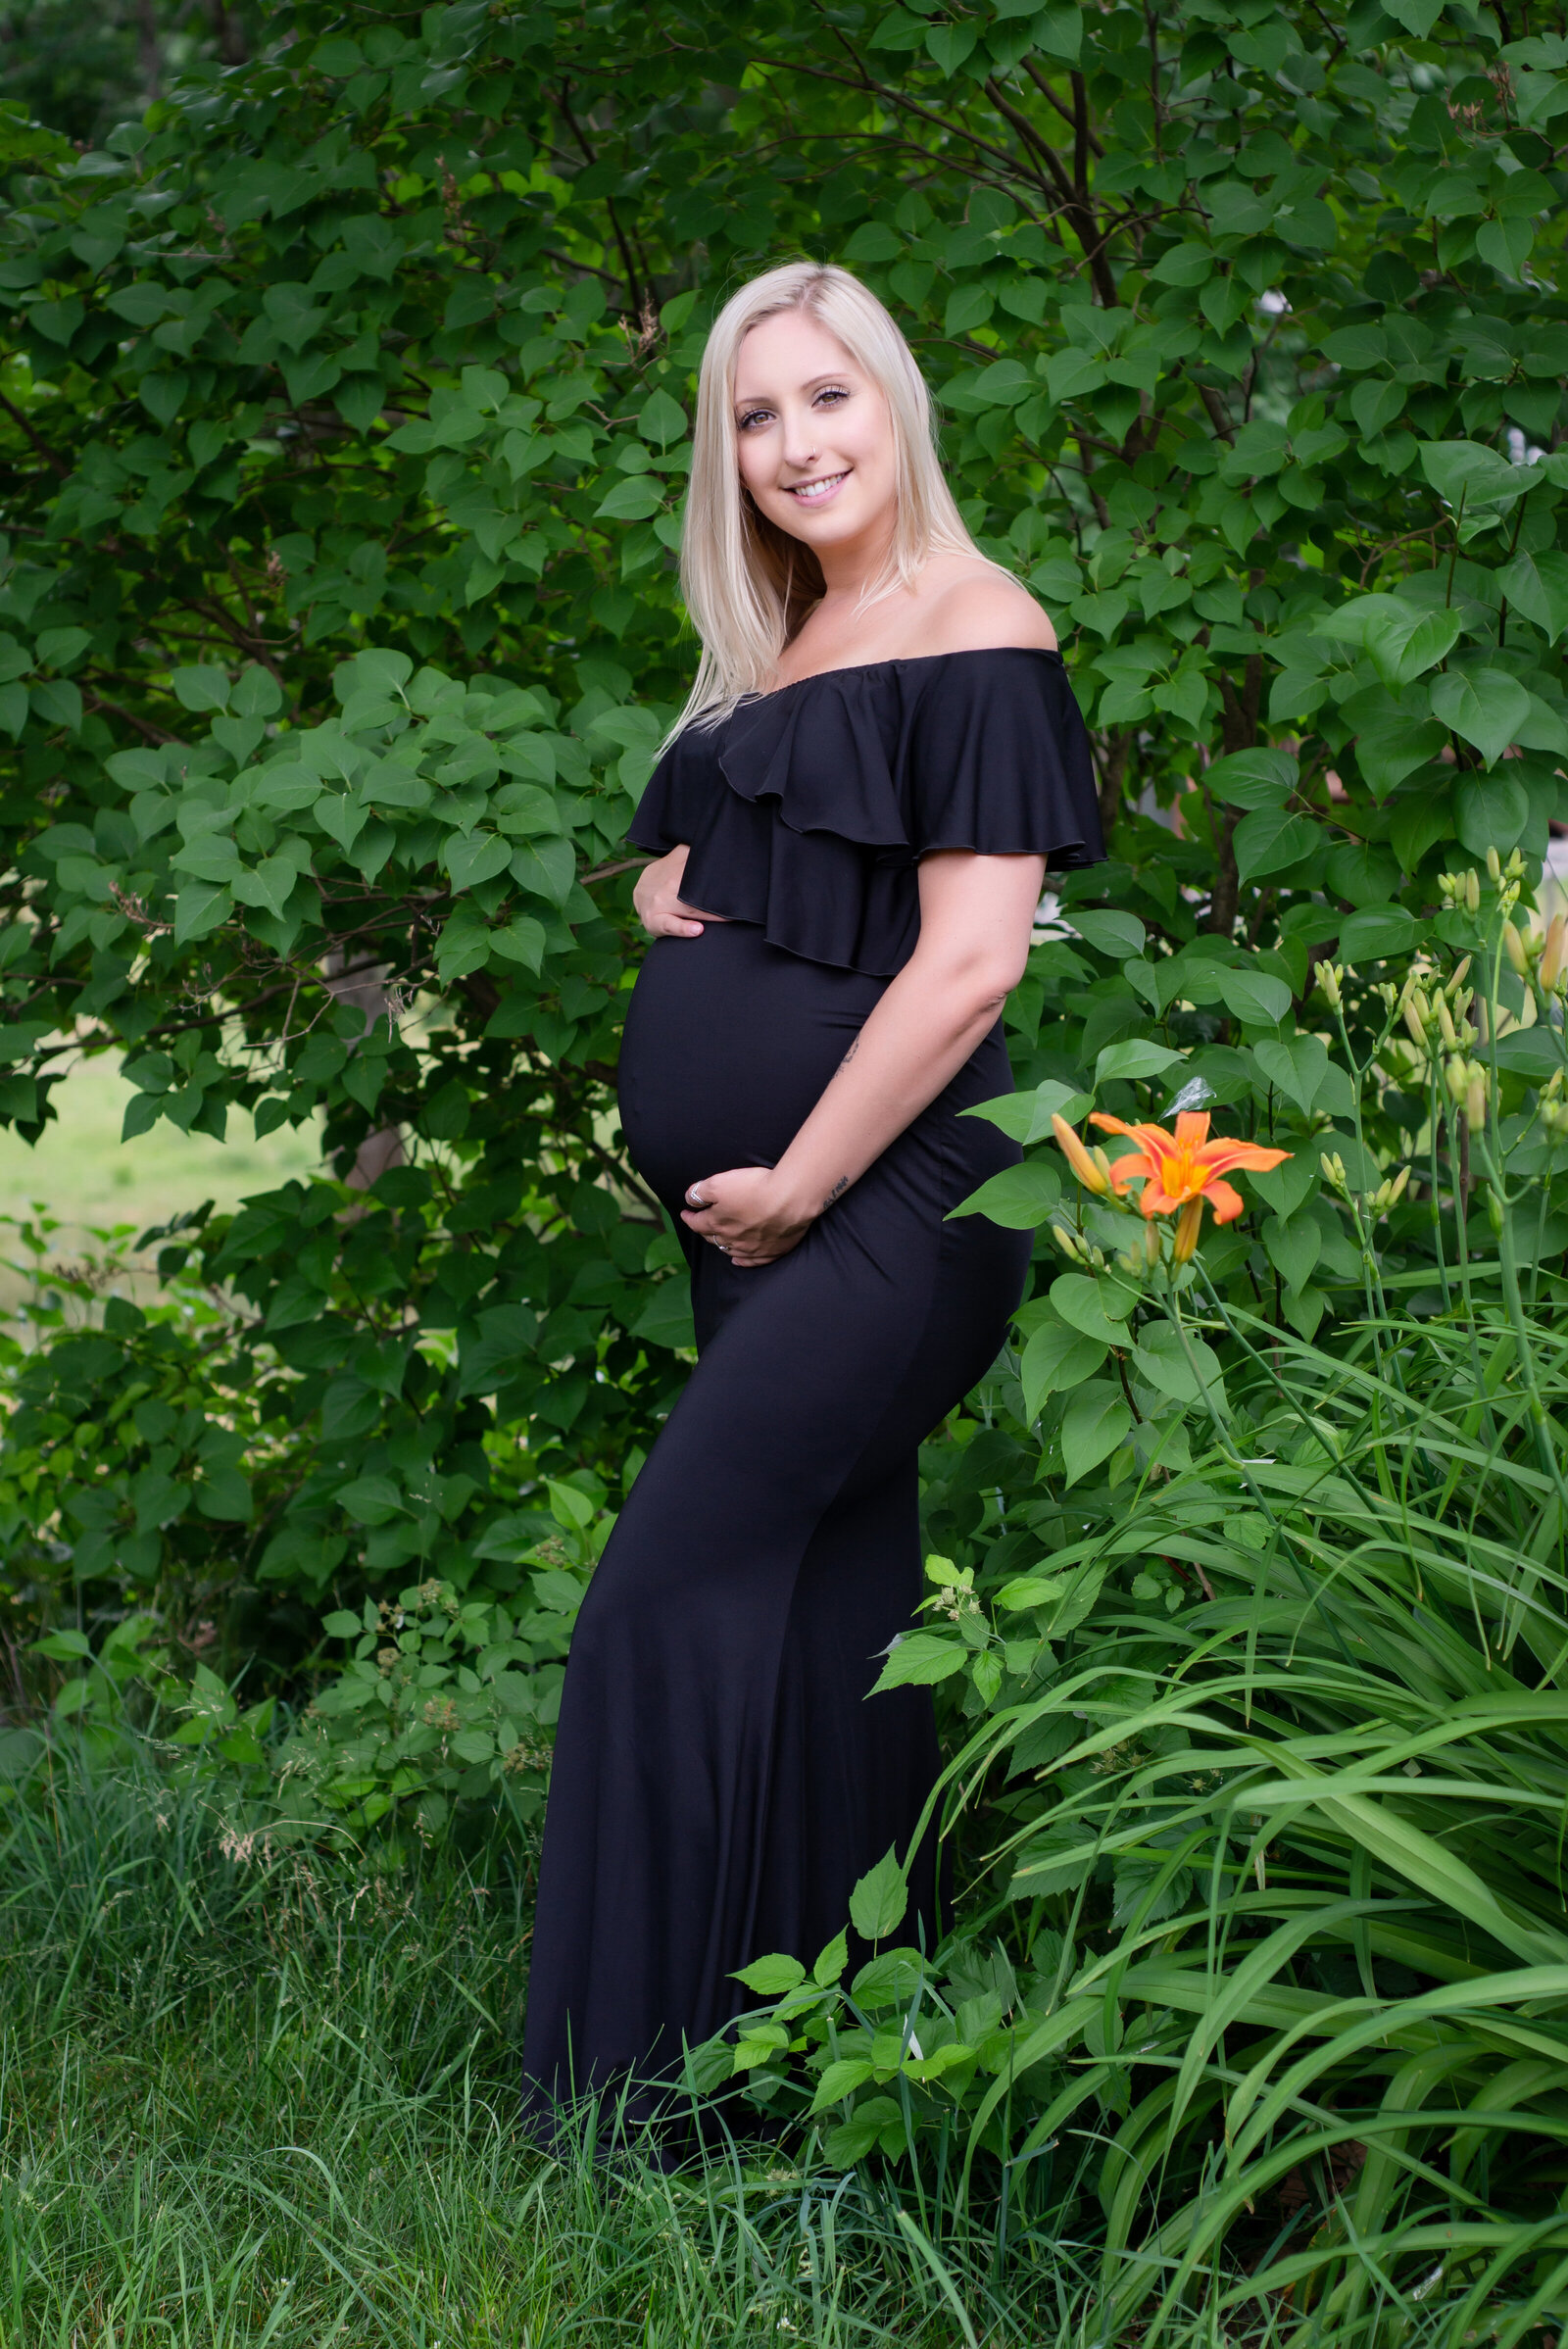 Pregnant woman in maternity photo in garden country setting